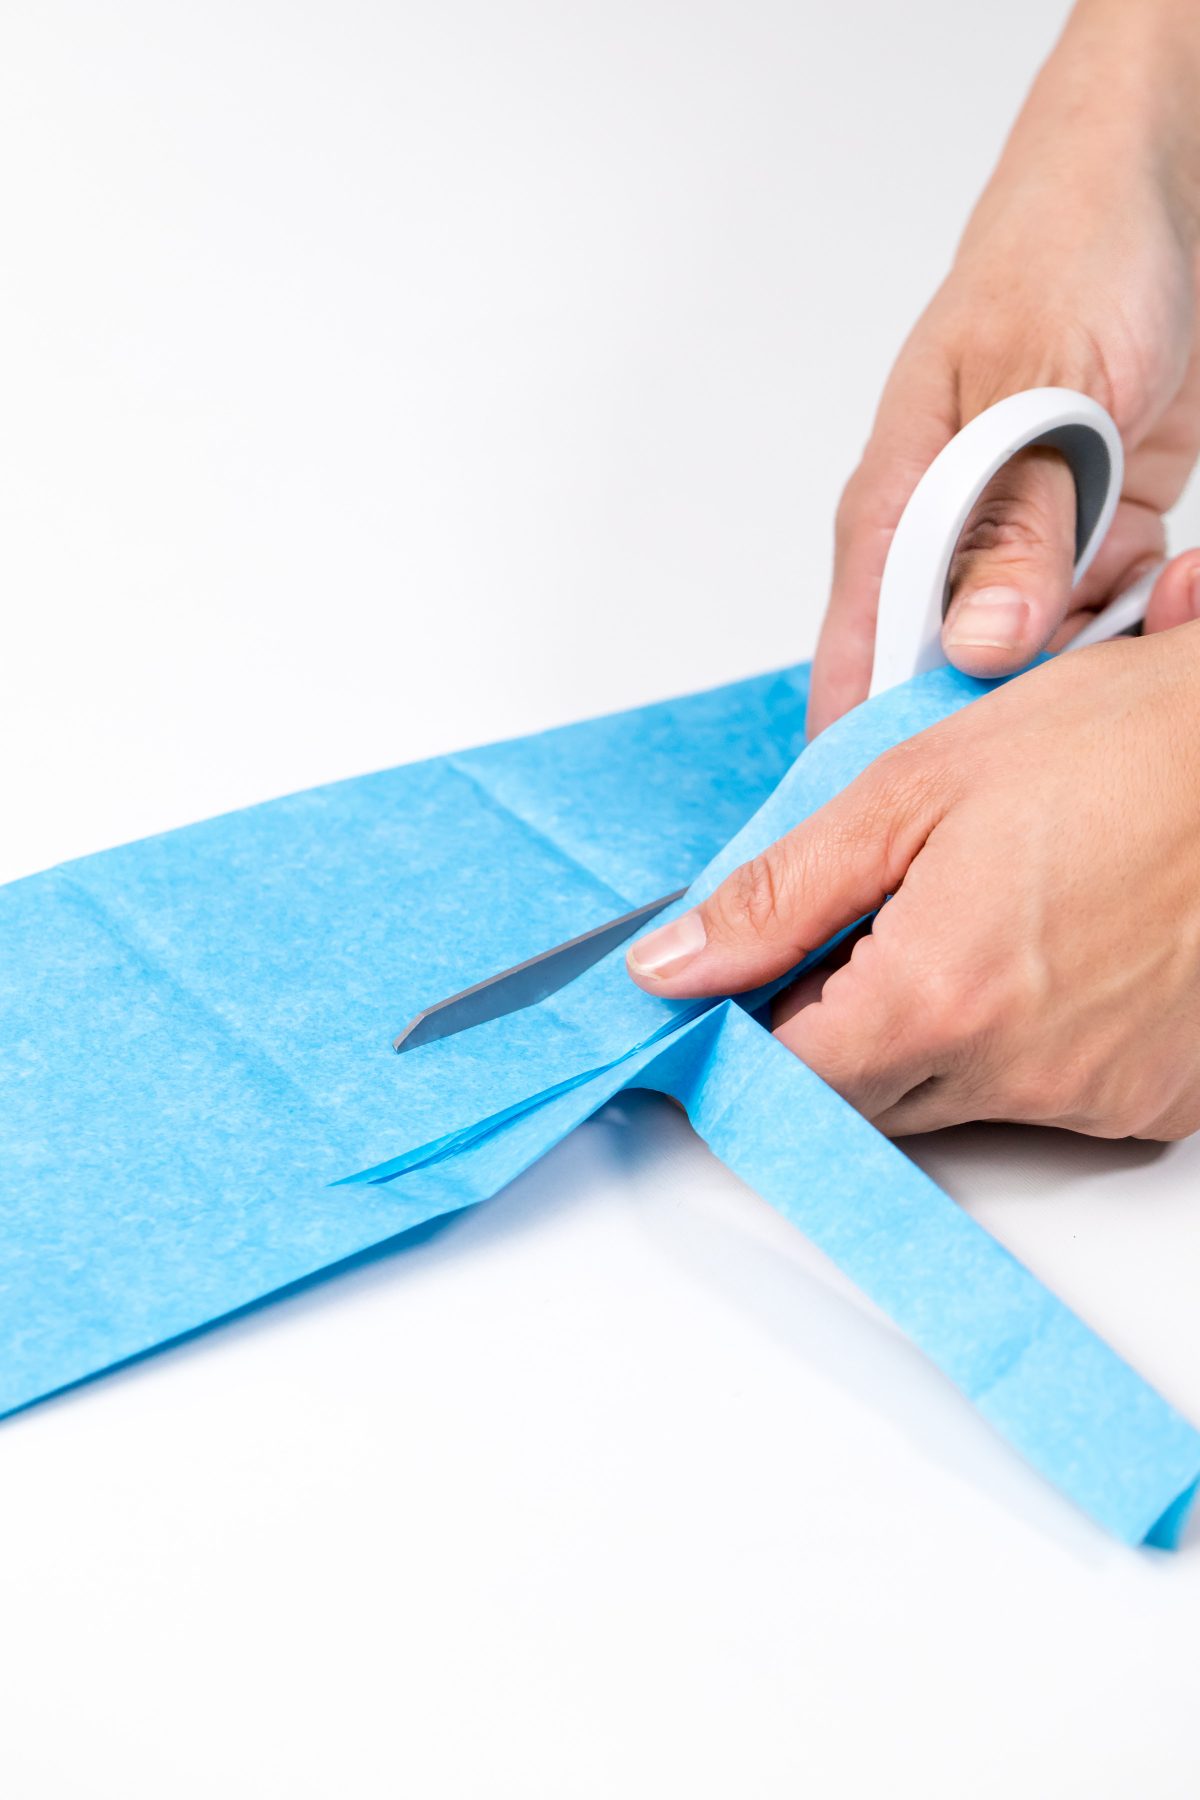 5D4B3482 - Father s Day Banner - cutting blue tissue paper with scissors